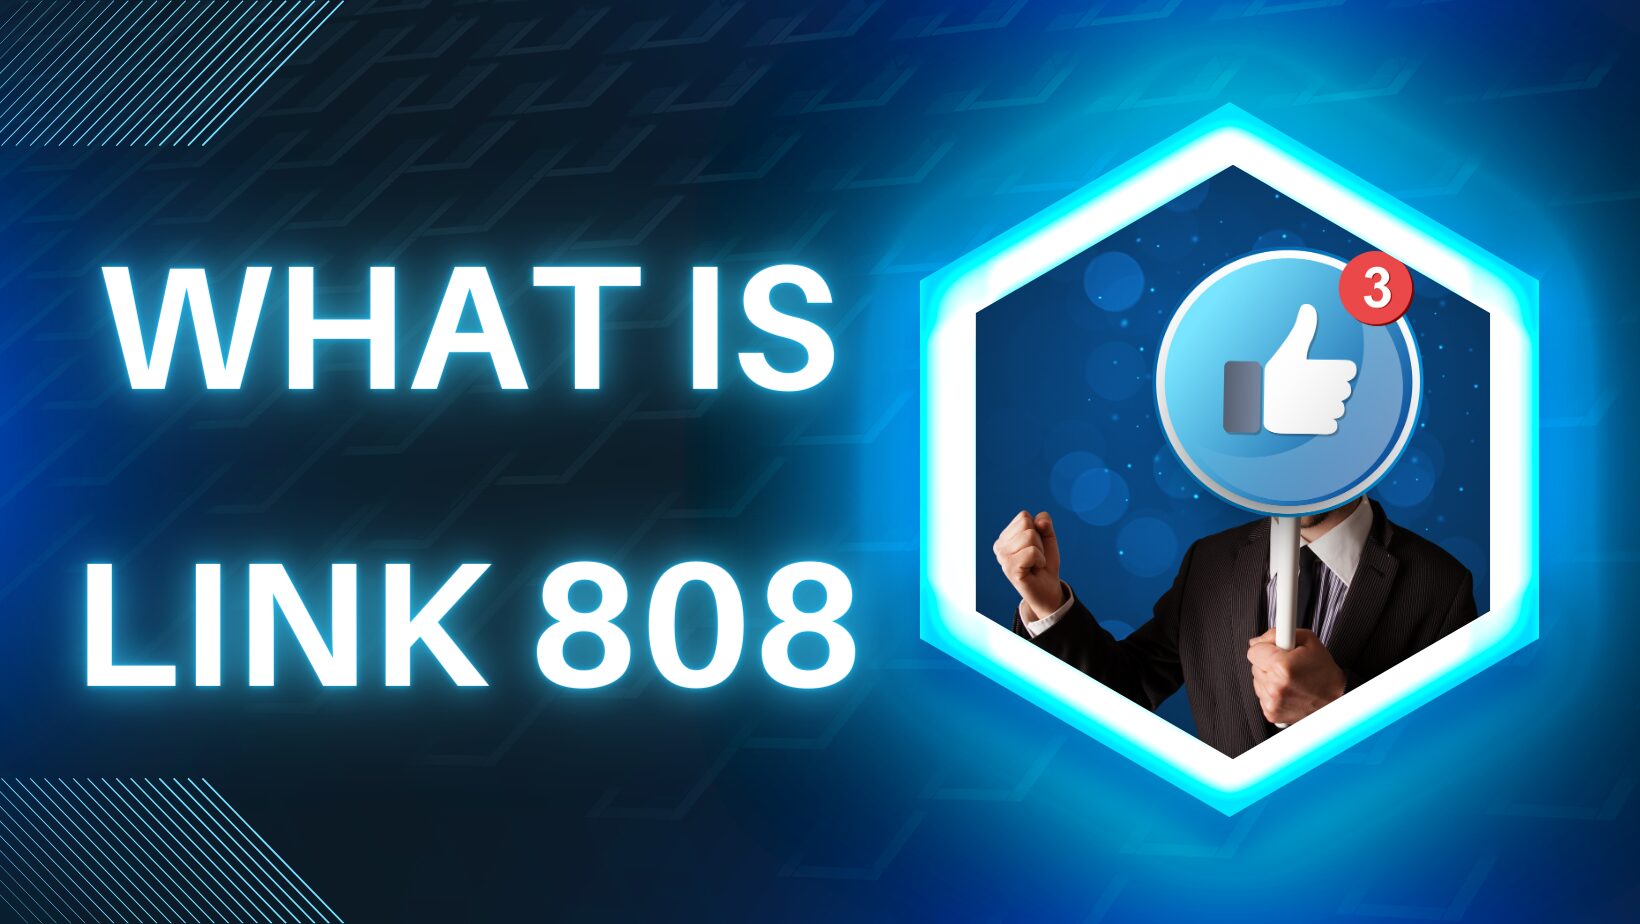 What is Link 808?